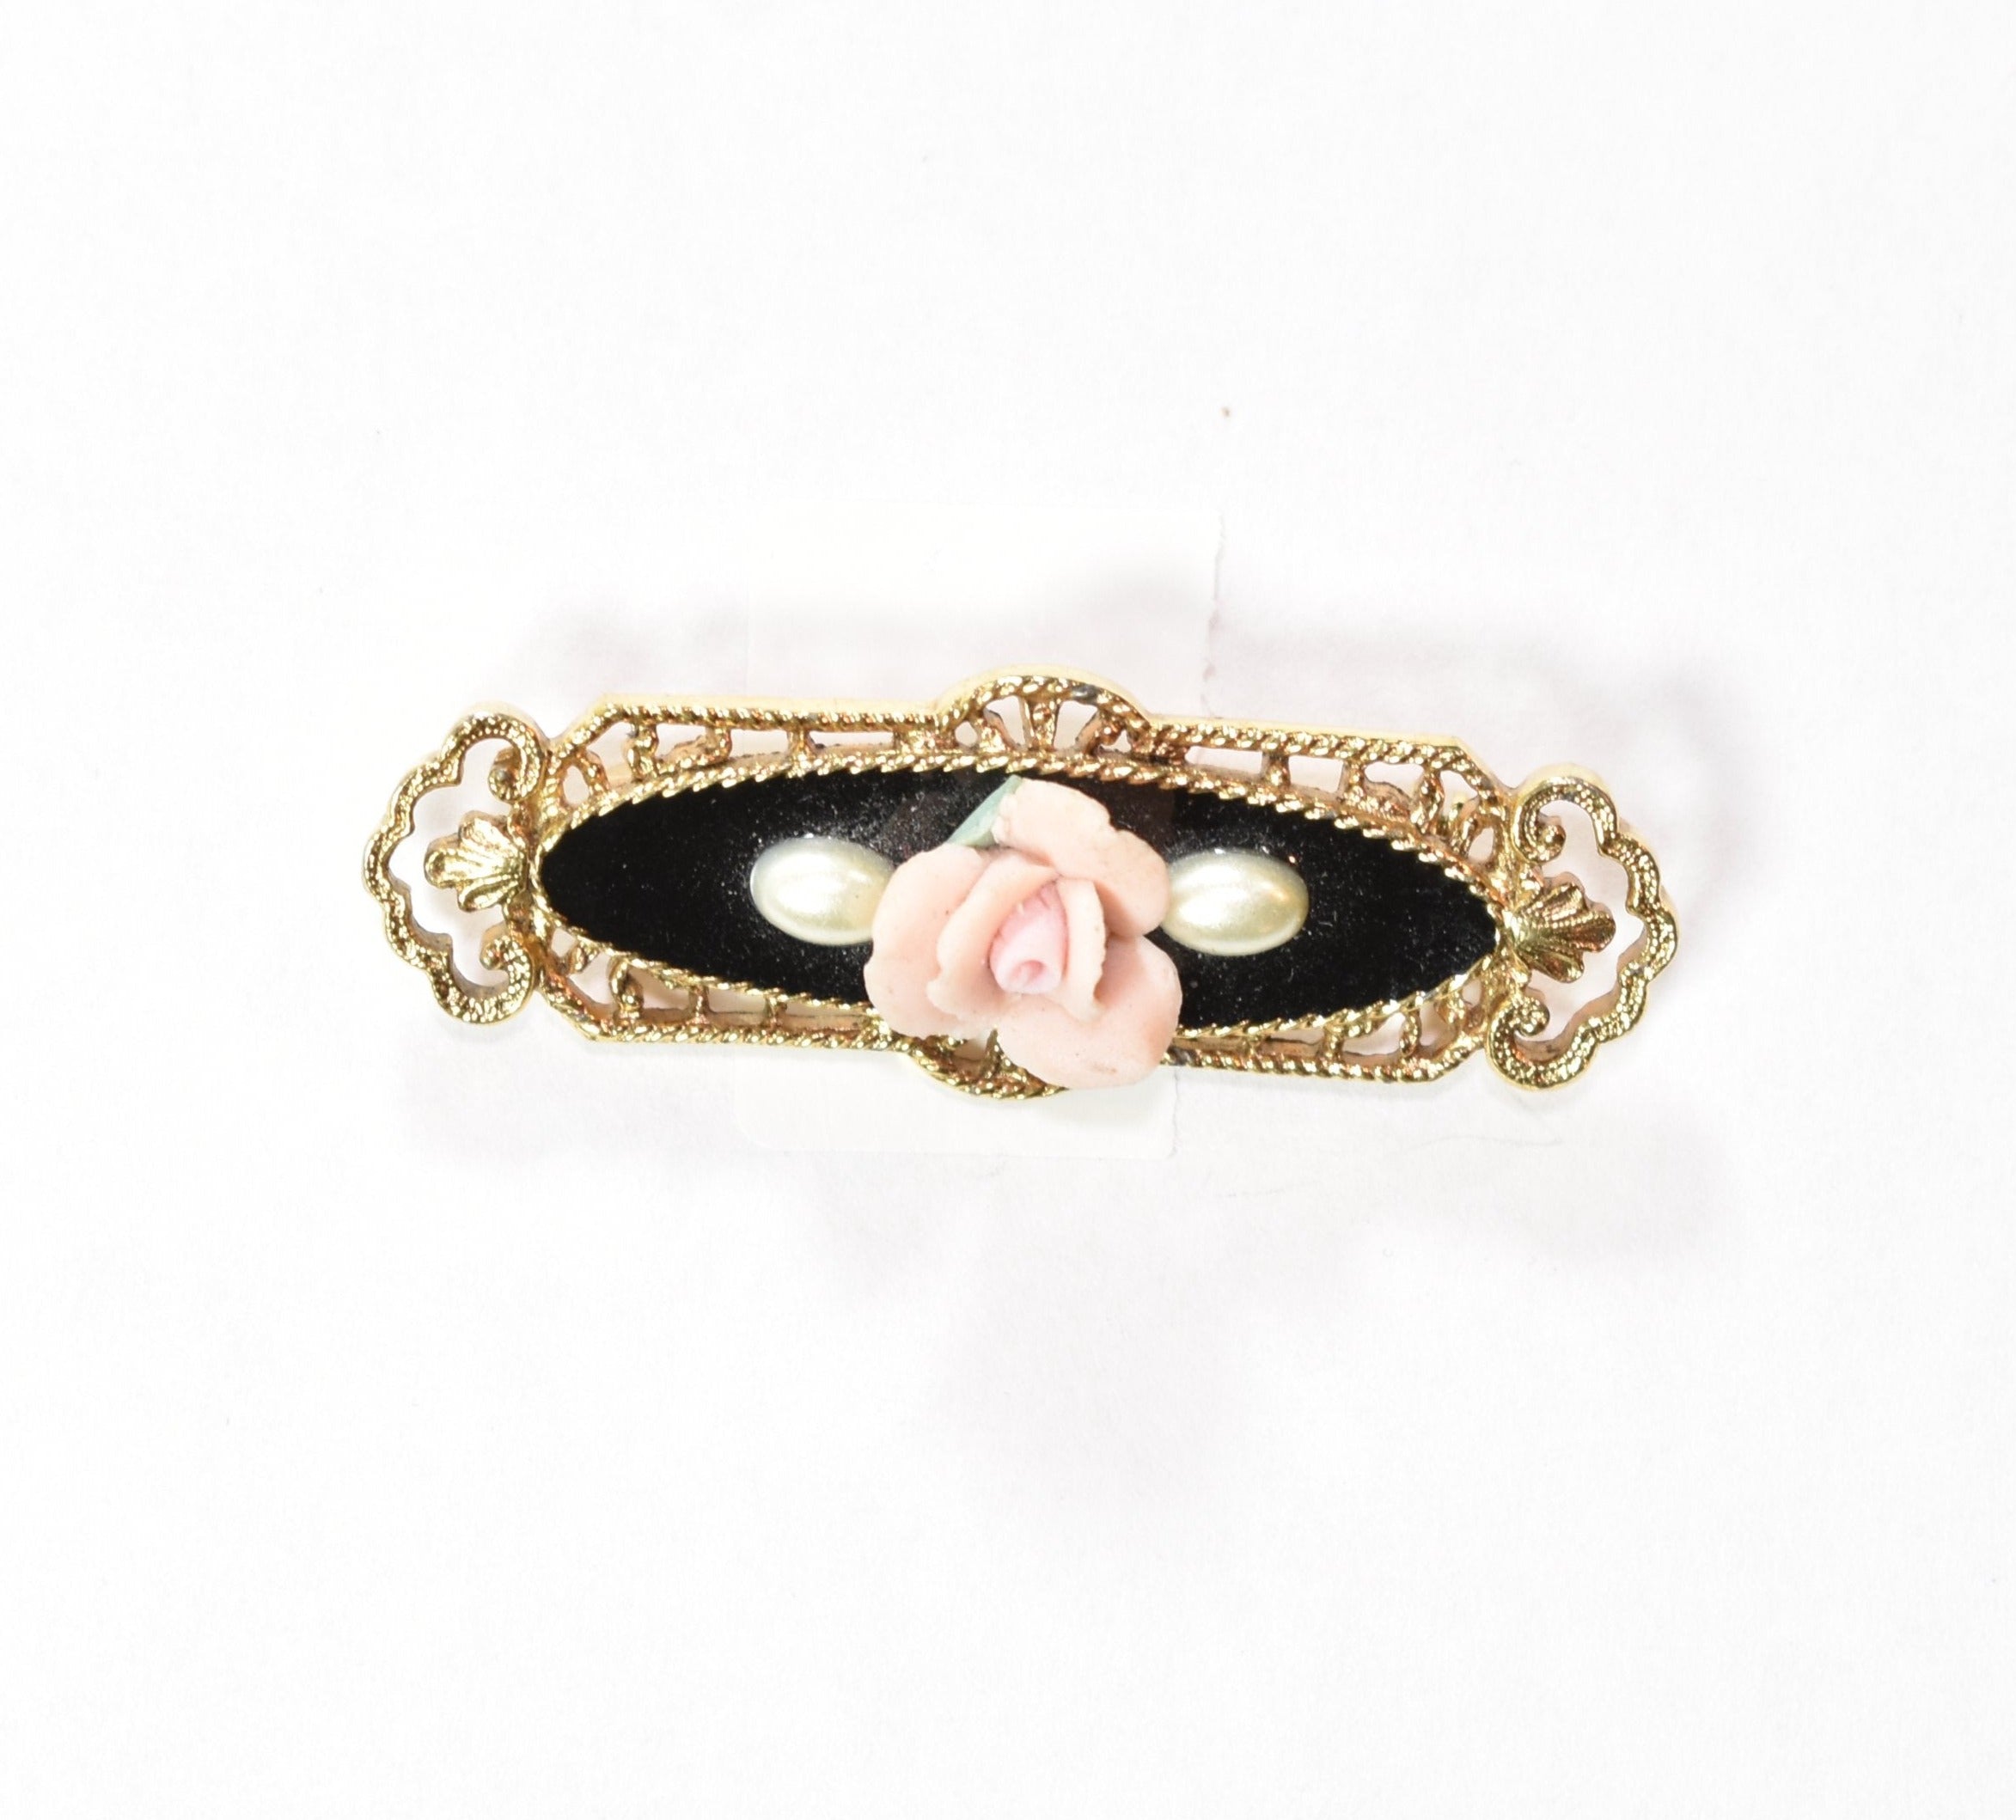 Vintage Brooch Pin pink rose gold and black pen used